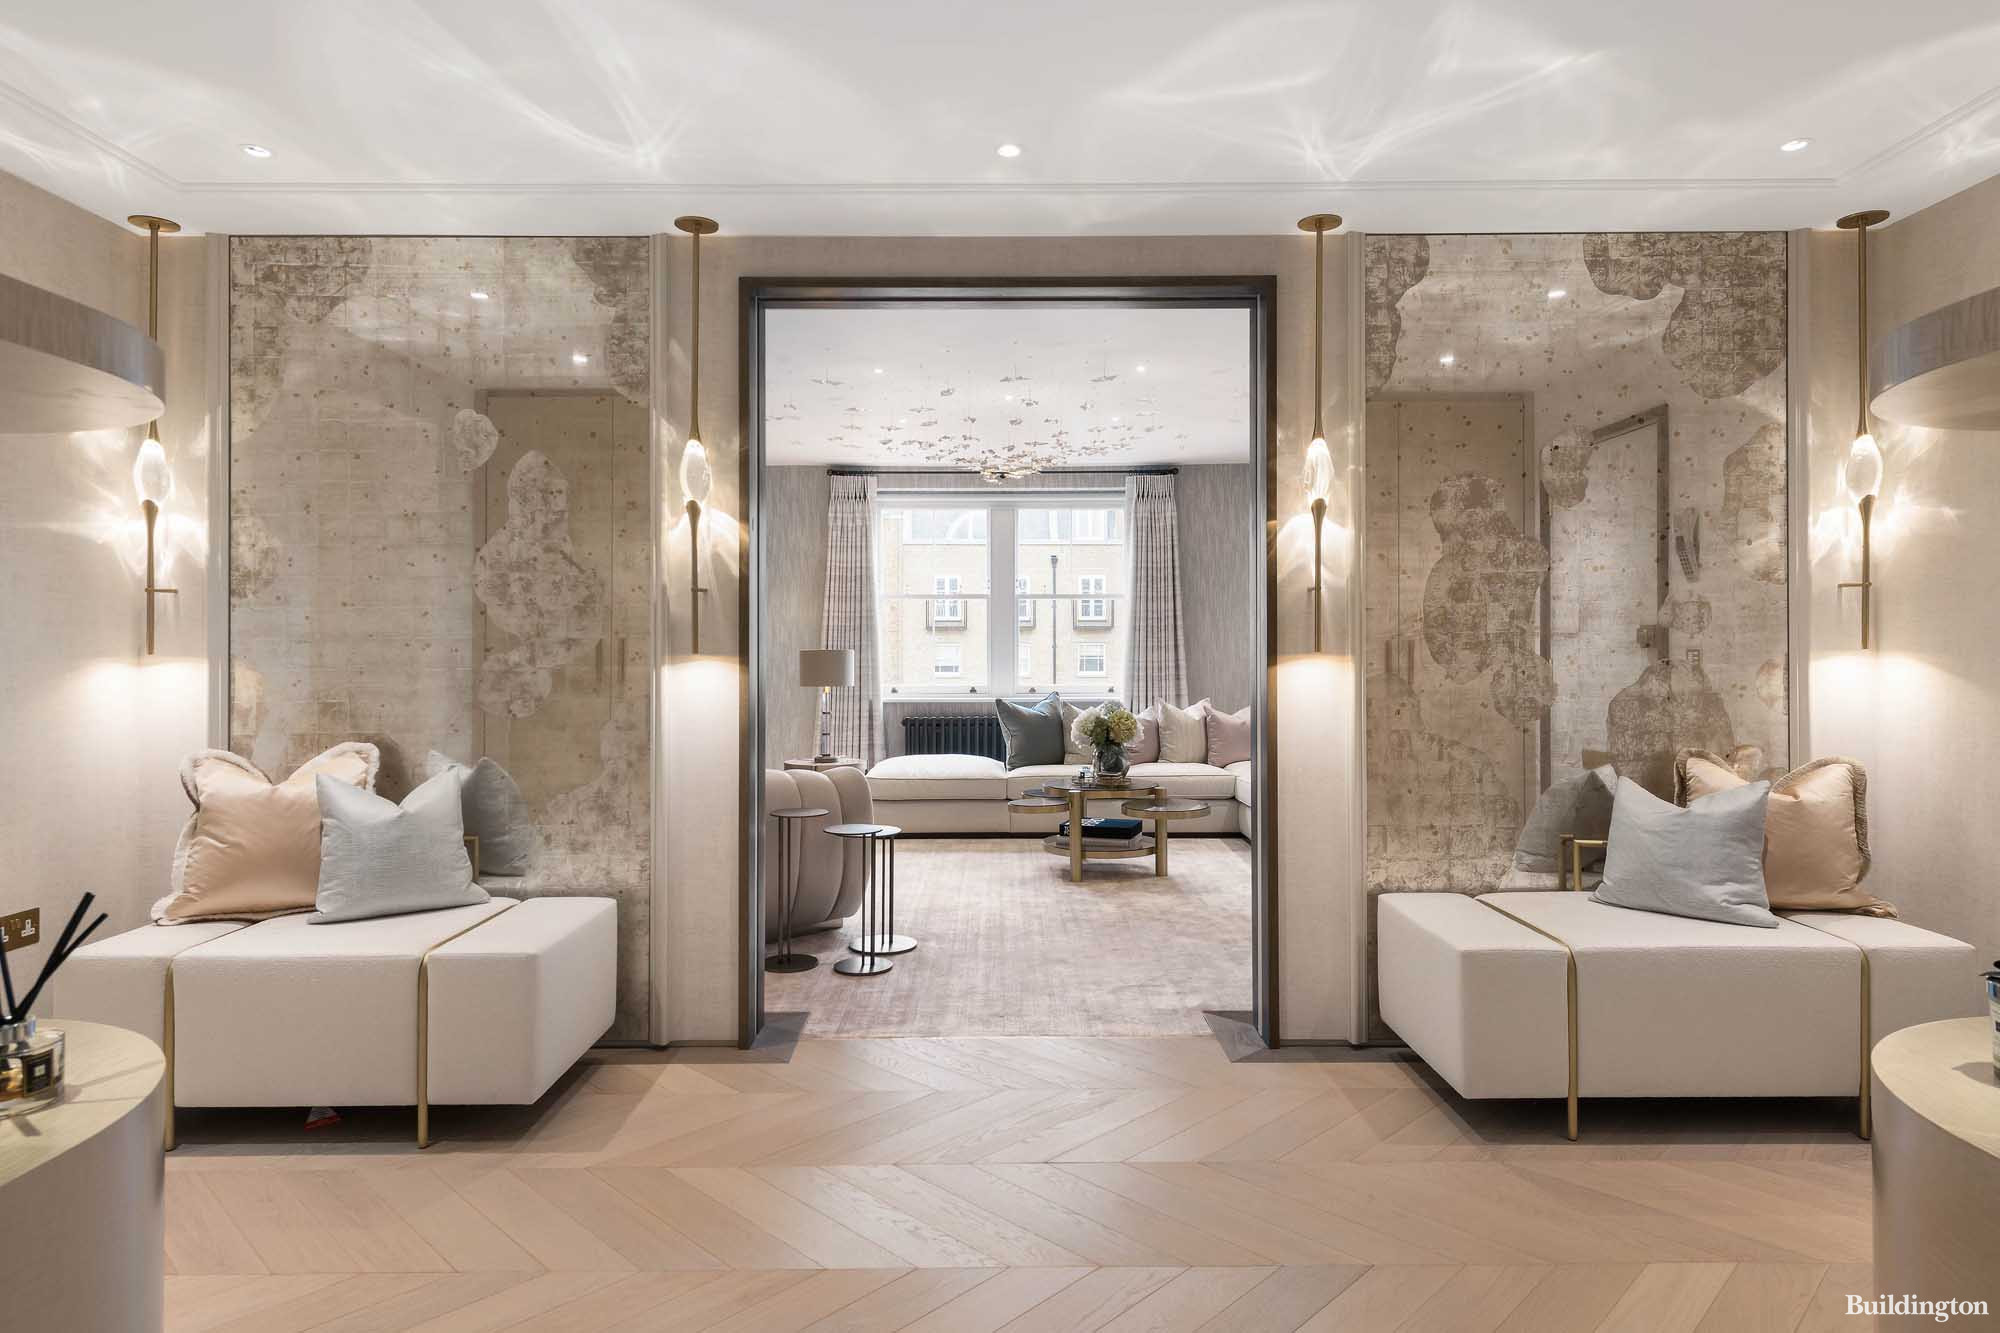 In 2021 boutique luxury developer One Point Six London secures the sale of the three-bedroom lateral apartment at 45 Eaton Square, achieving £3,678 per sq ft, a record for an upper floor flat on the prestigious square.